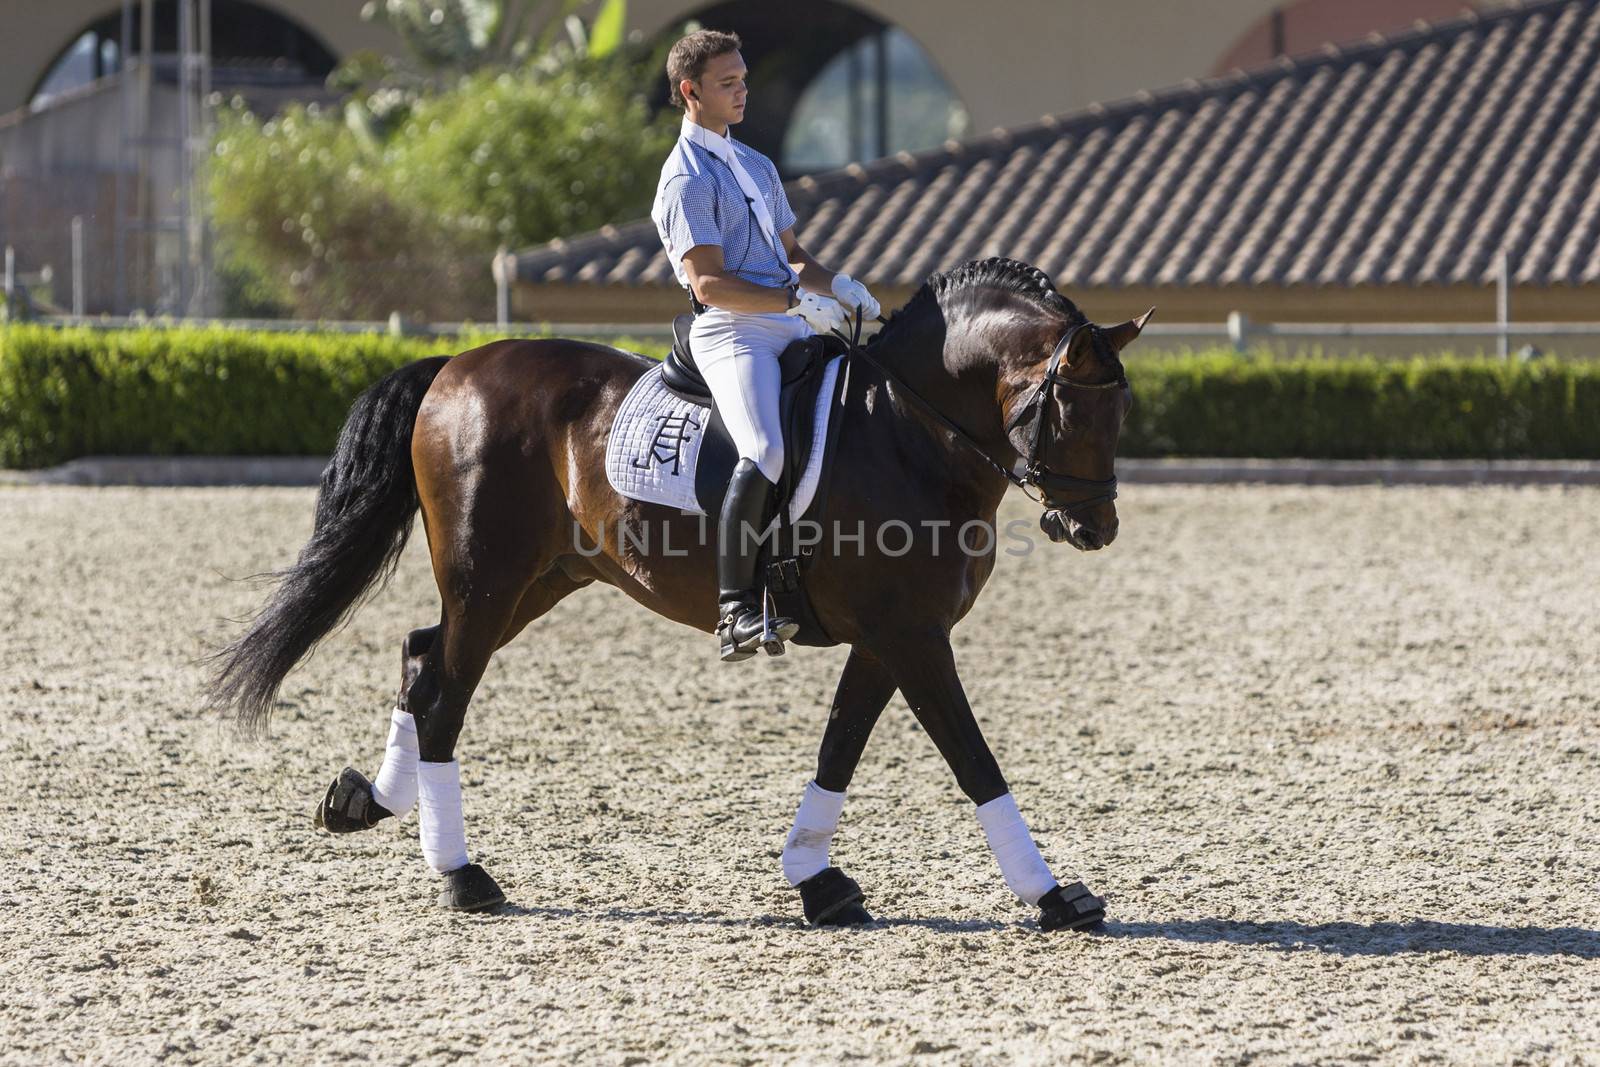 Estepona, Malaga province, SPAIN - 4 july 2009: Spanish horse of pure race taking part during an exercise of equestrian morphology in Estepona, Malaga province, Andalusia, Spain